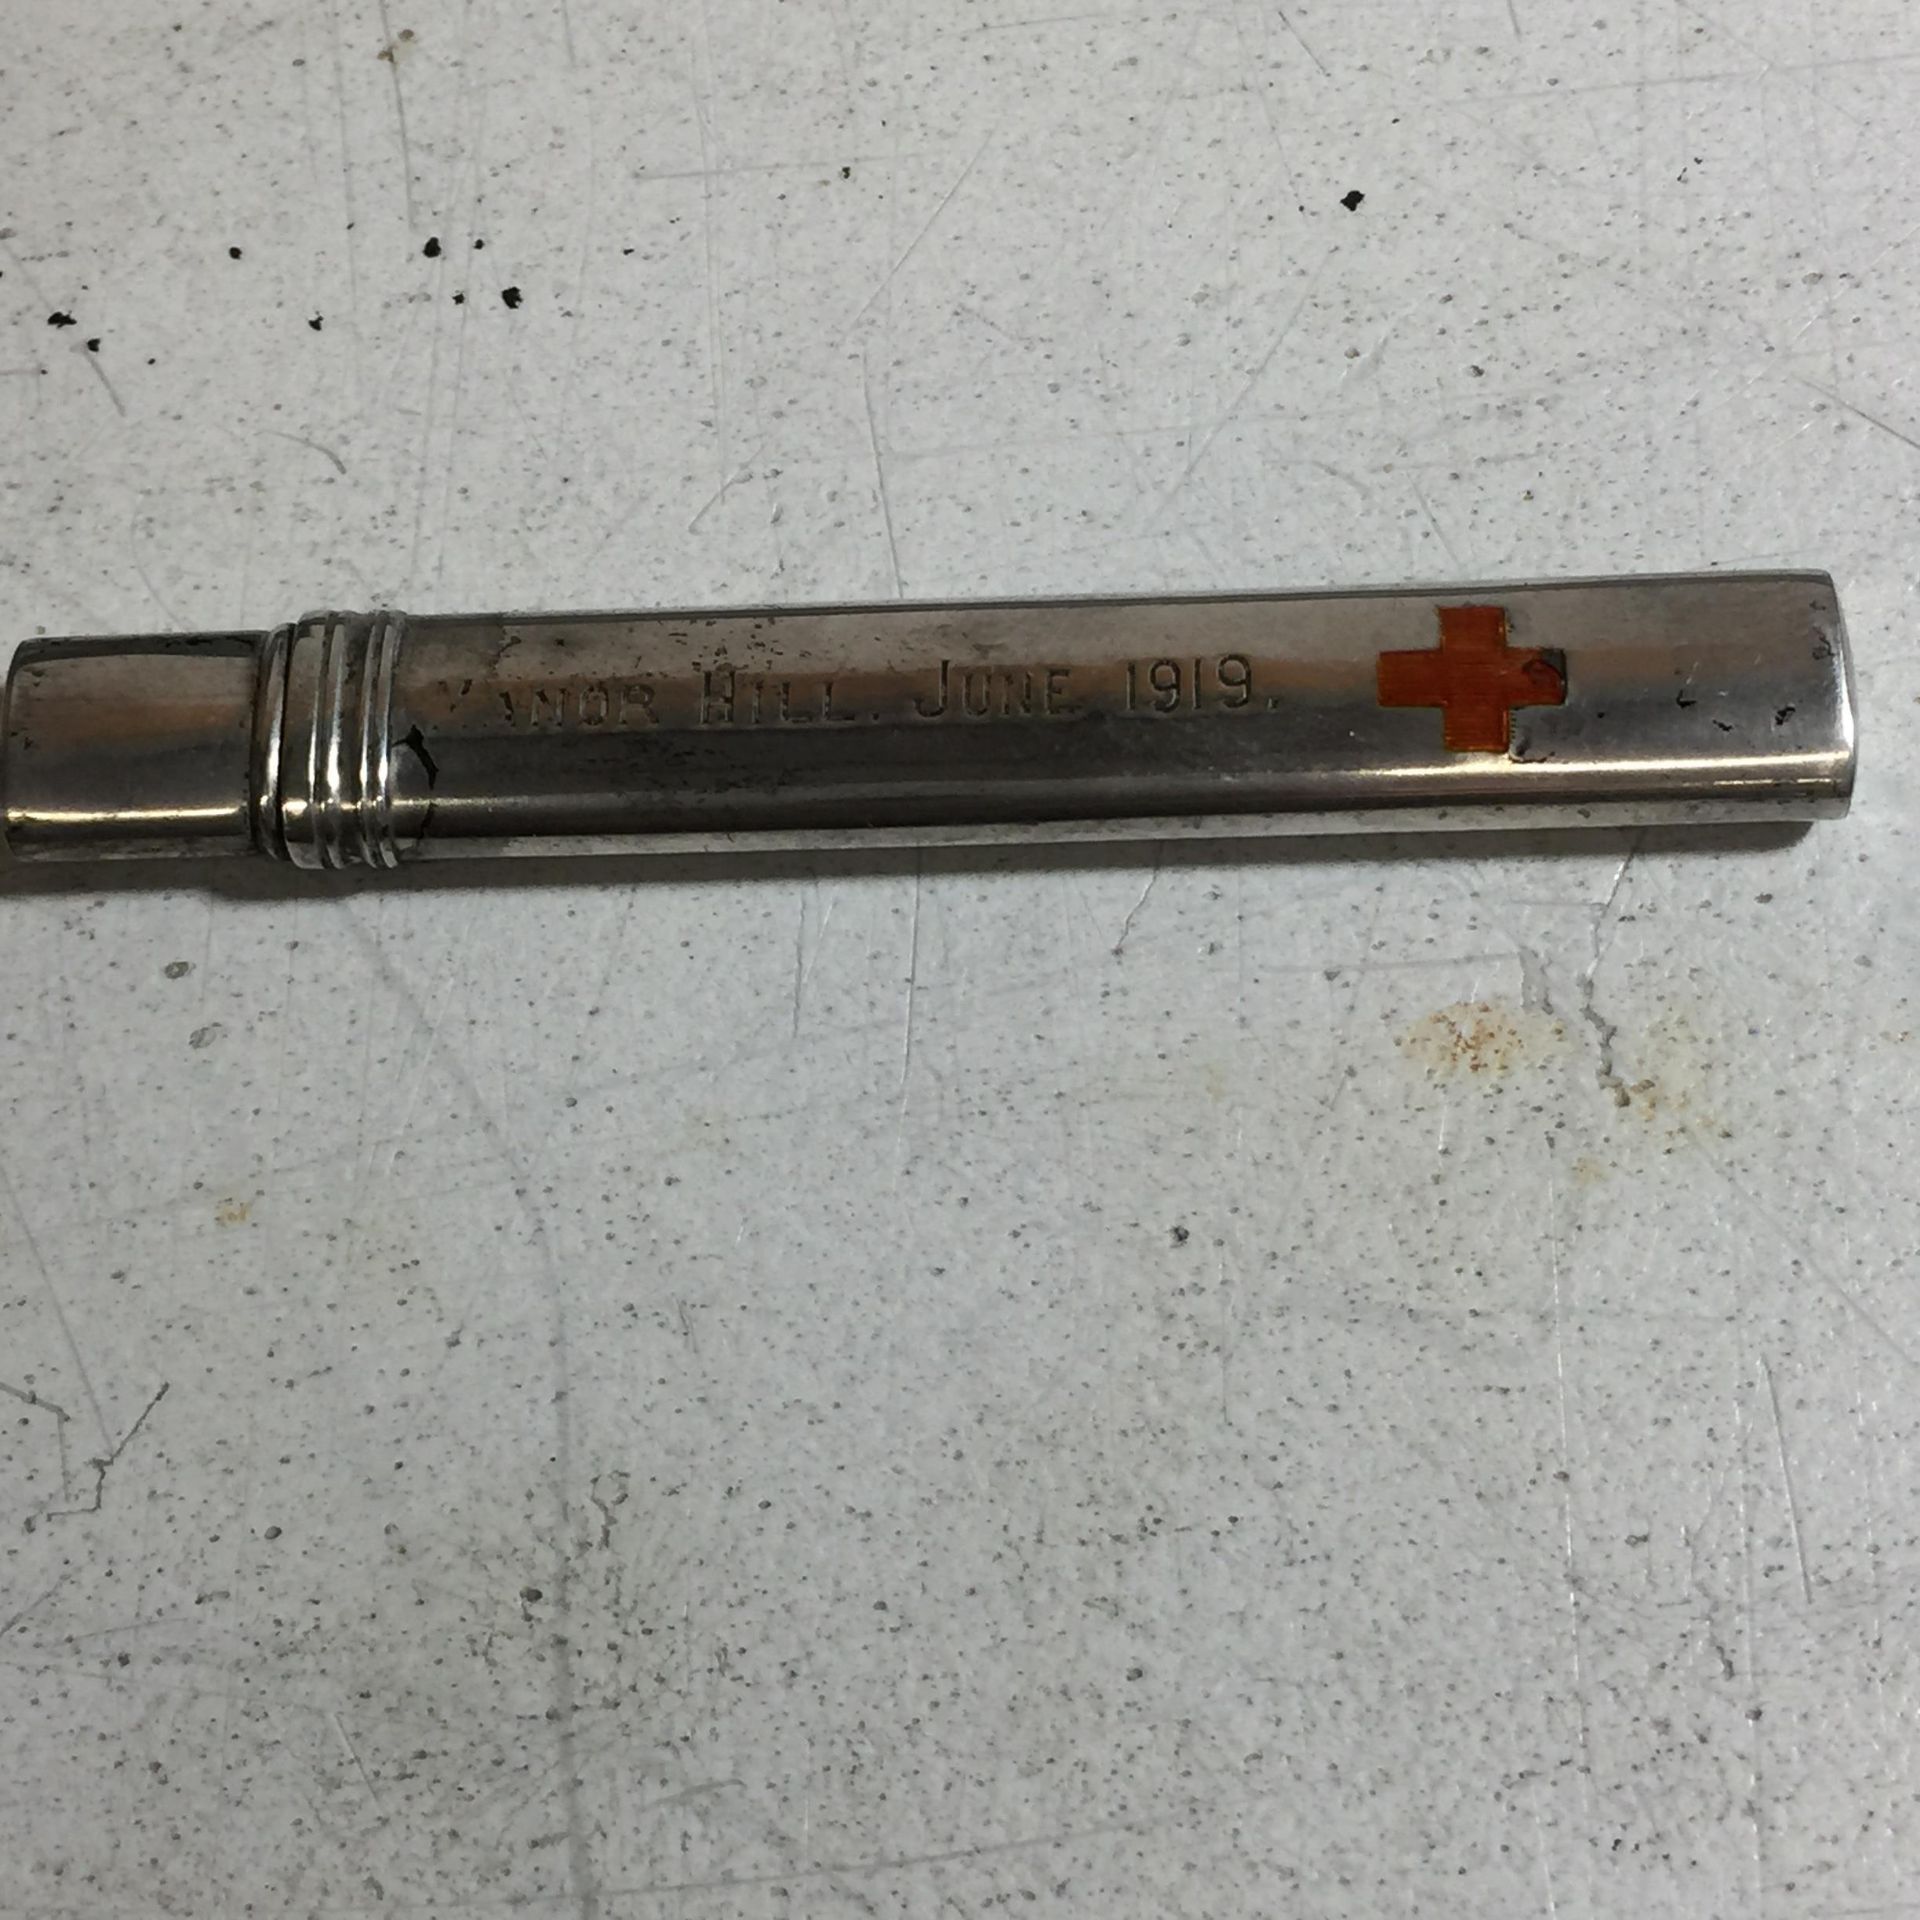 A SILVER 1919 RED CROSS PENCIL